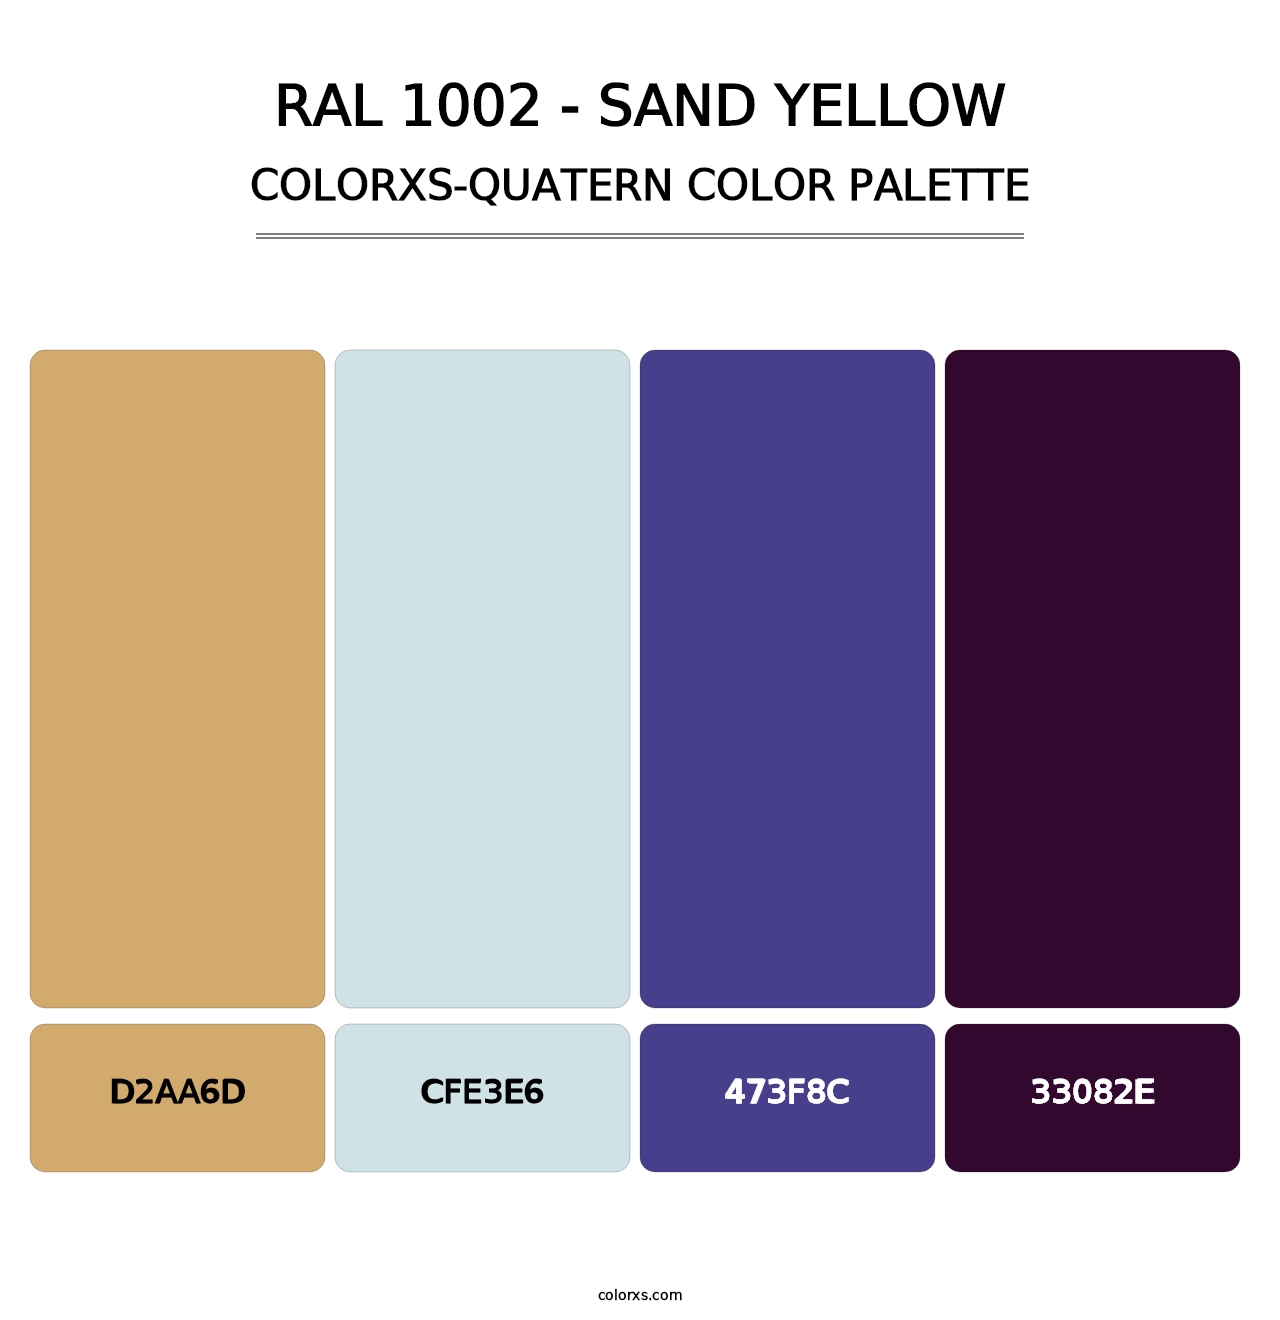 RAL 1002 - Sand Yellow - Colorxs Quatern Palette